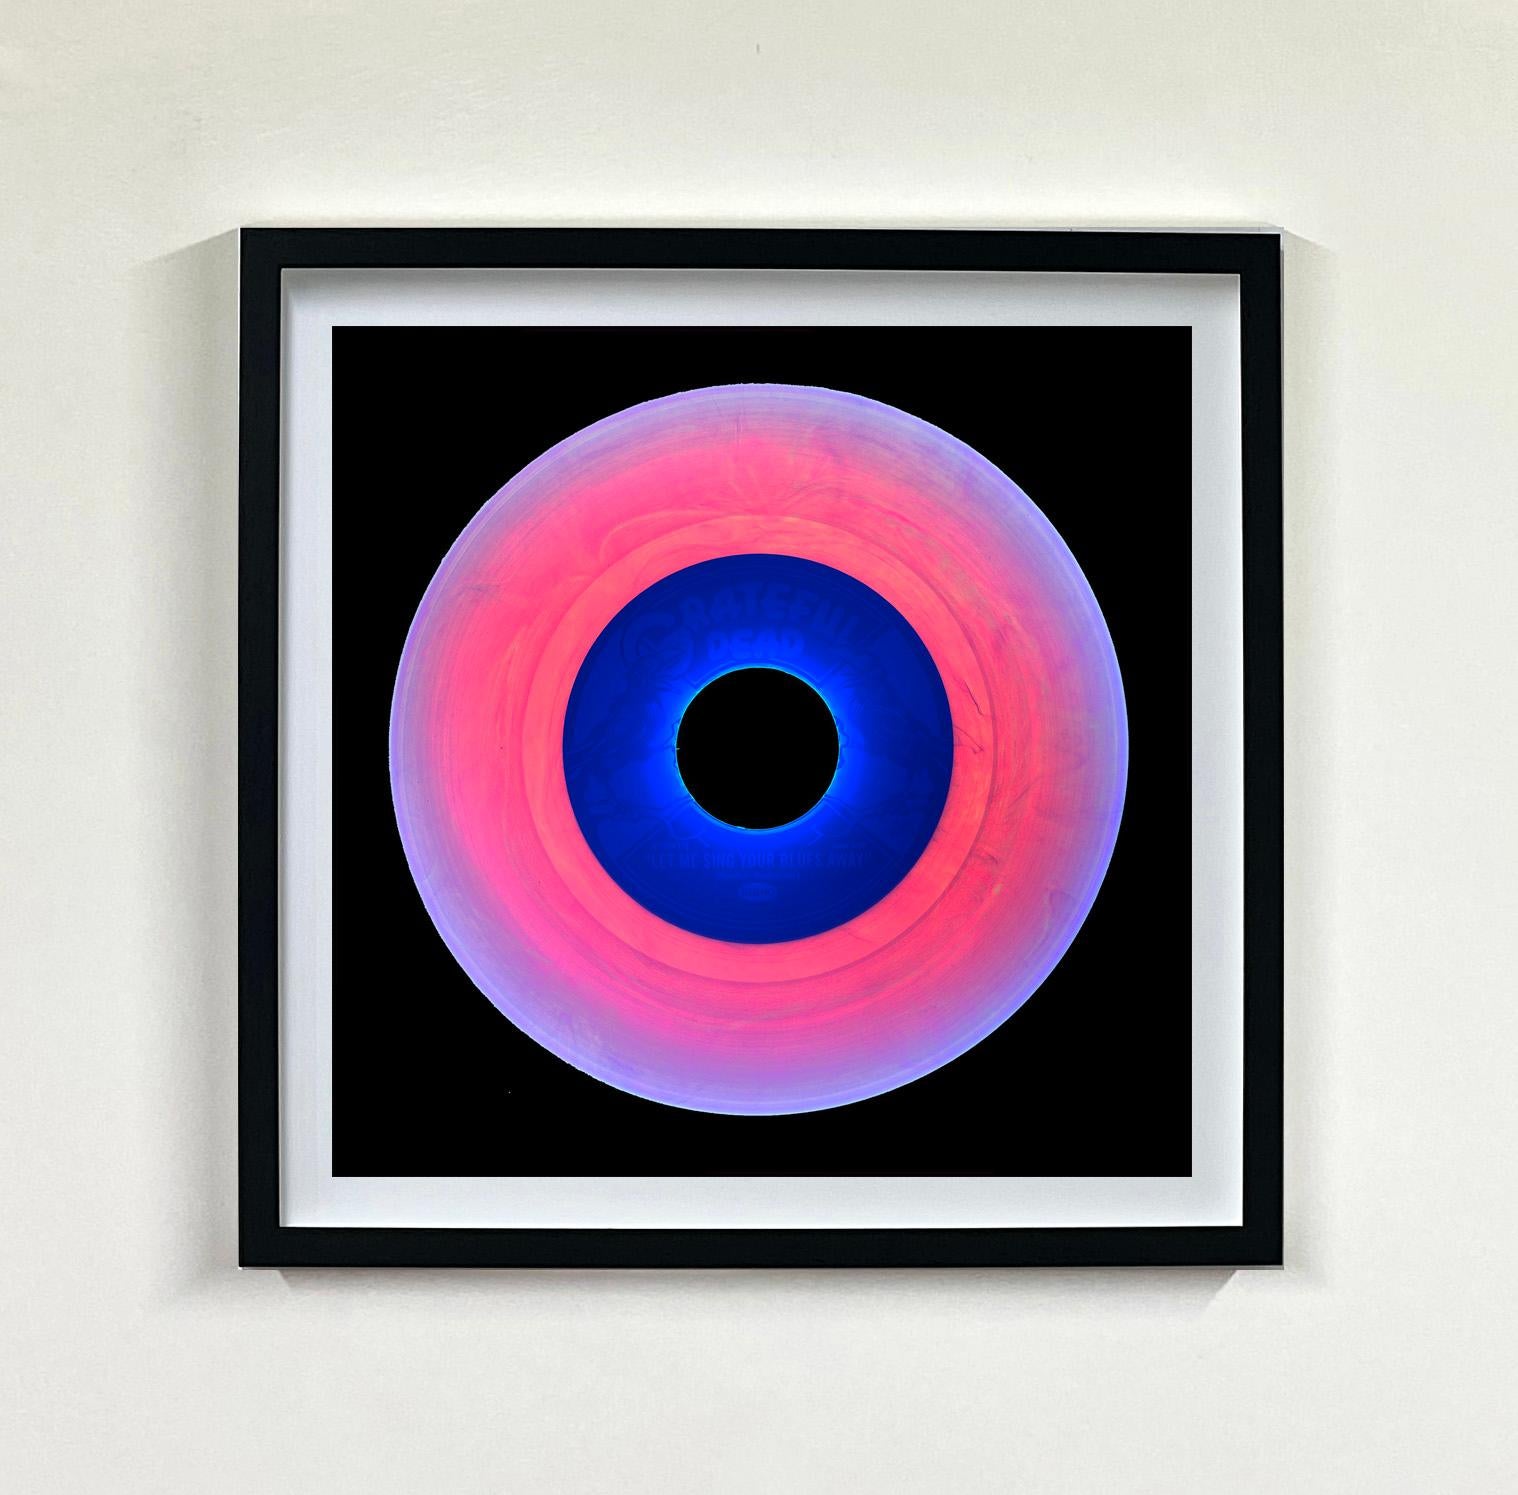 Heidler & Heeps Vinyl Collection Sixteen Piece Multicolor Square Installation.
Acclaimed contemporary photographers, Richard Heeps and Natasha Heidler have collaborated to make this beautifully mesmerising collection. A celebration of the vinyl